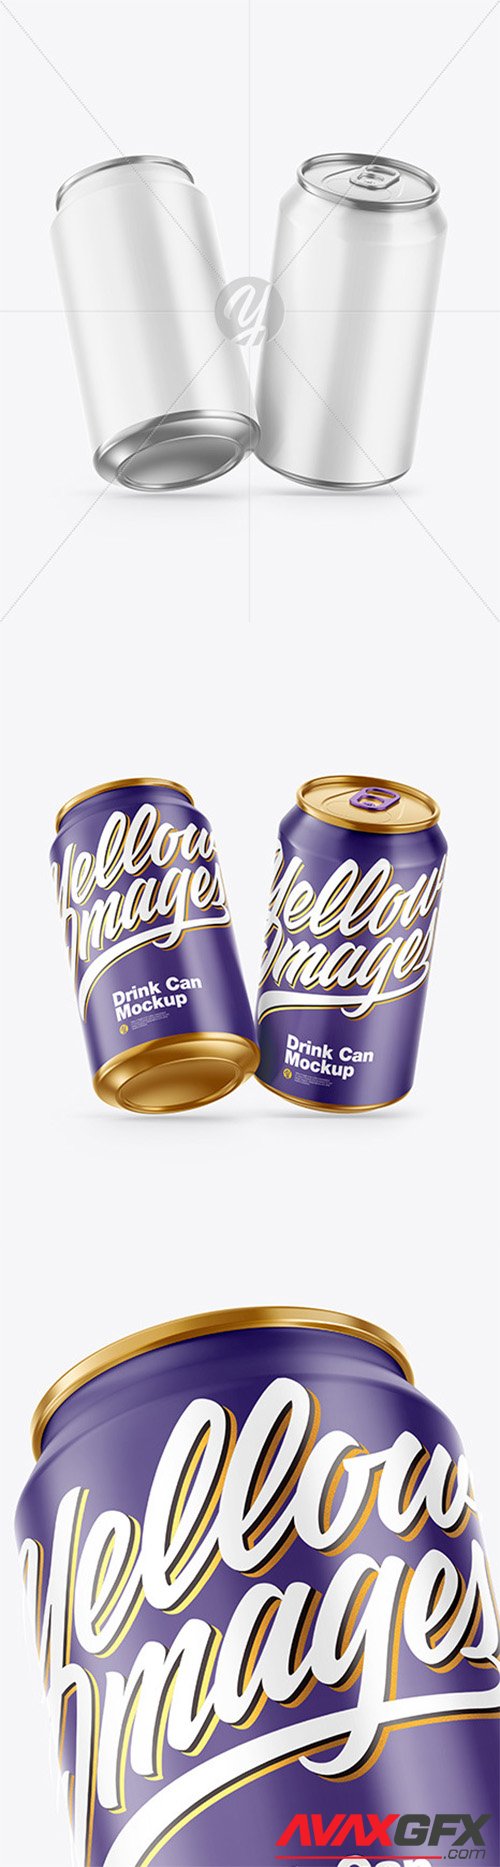 Two Metallic Drink Cans w/ Glossy Finish Mockup 68403